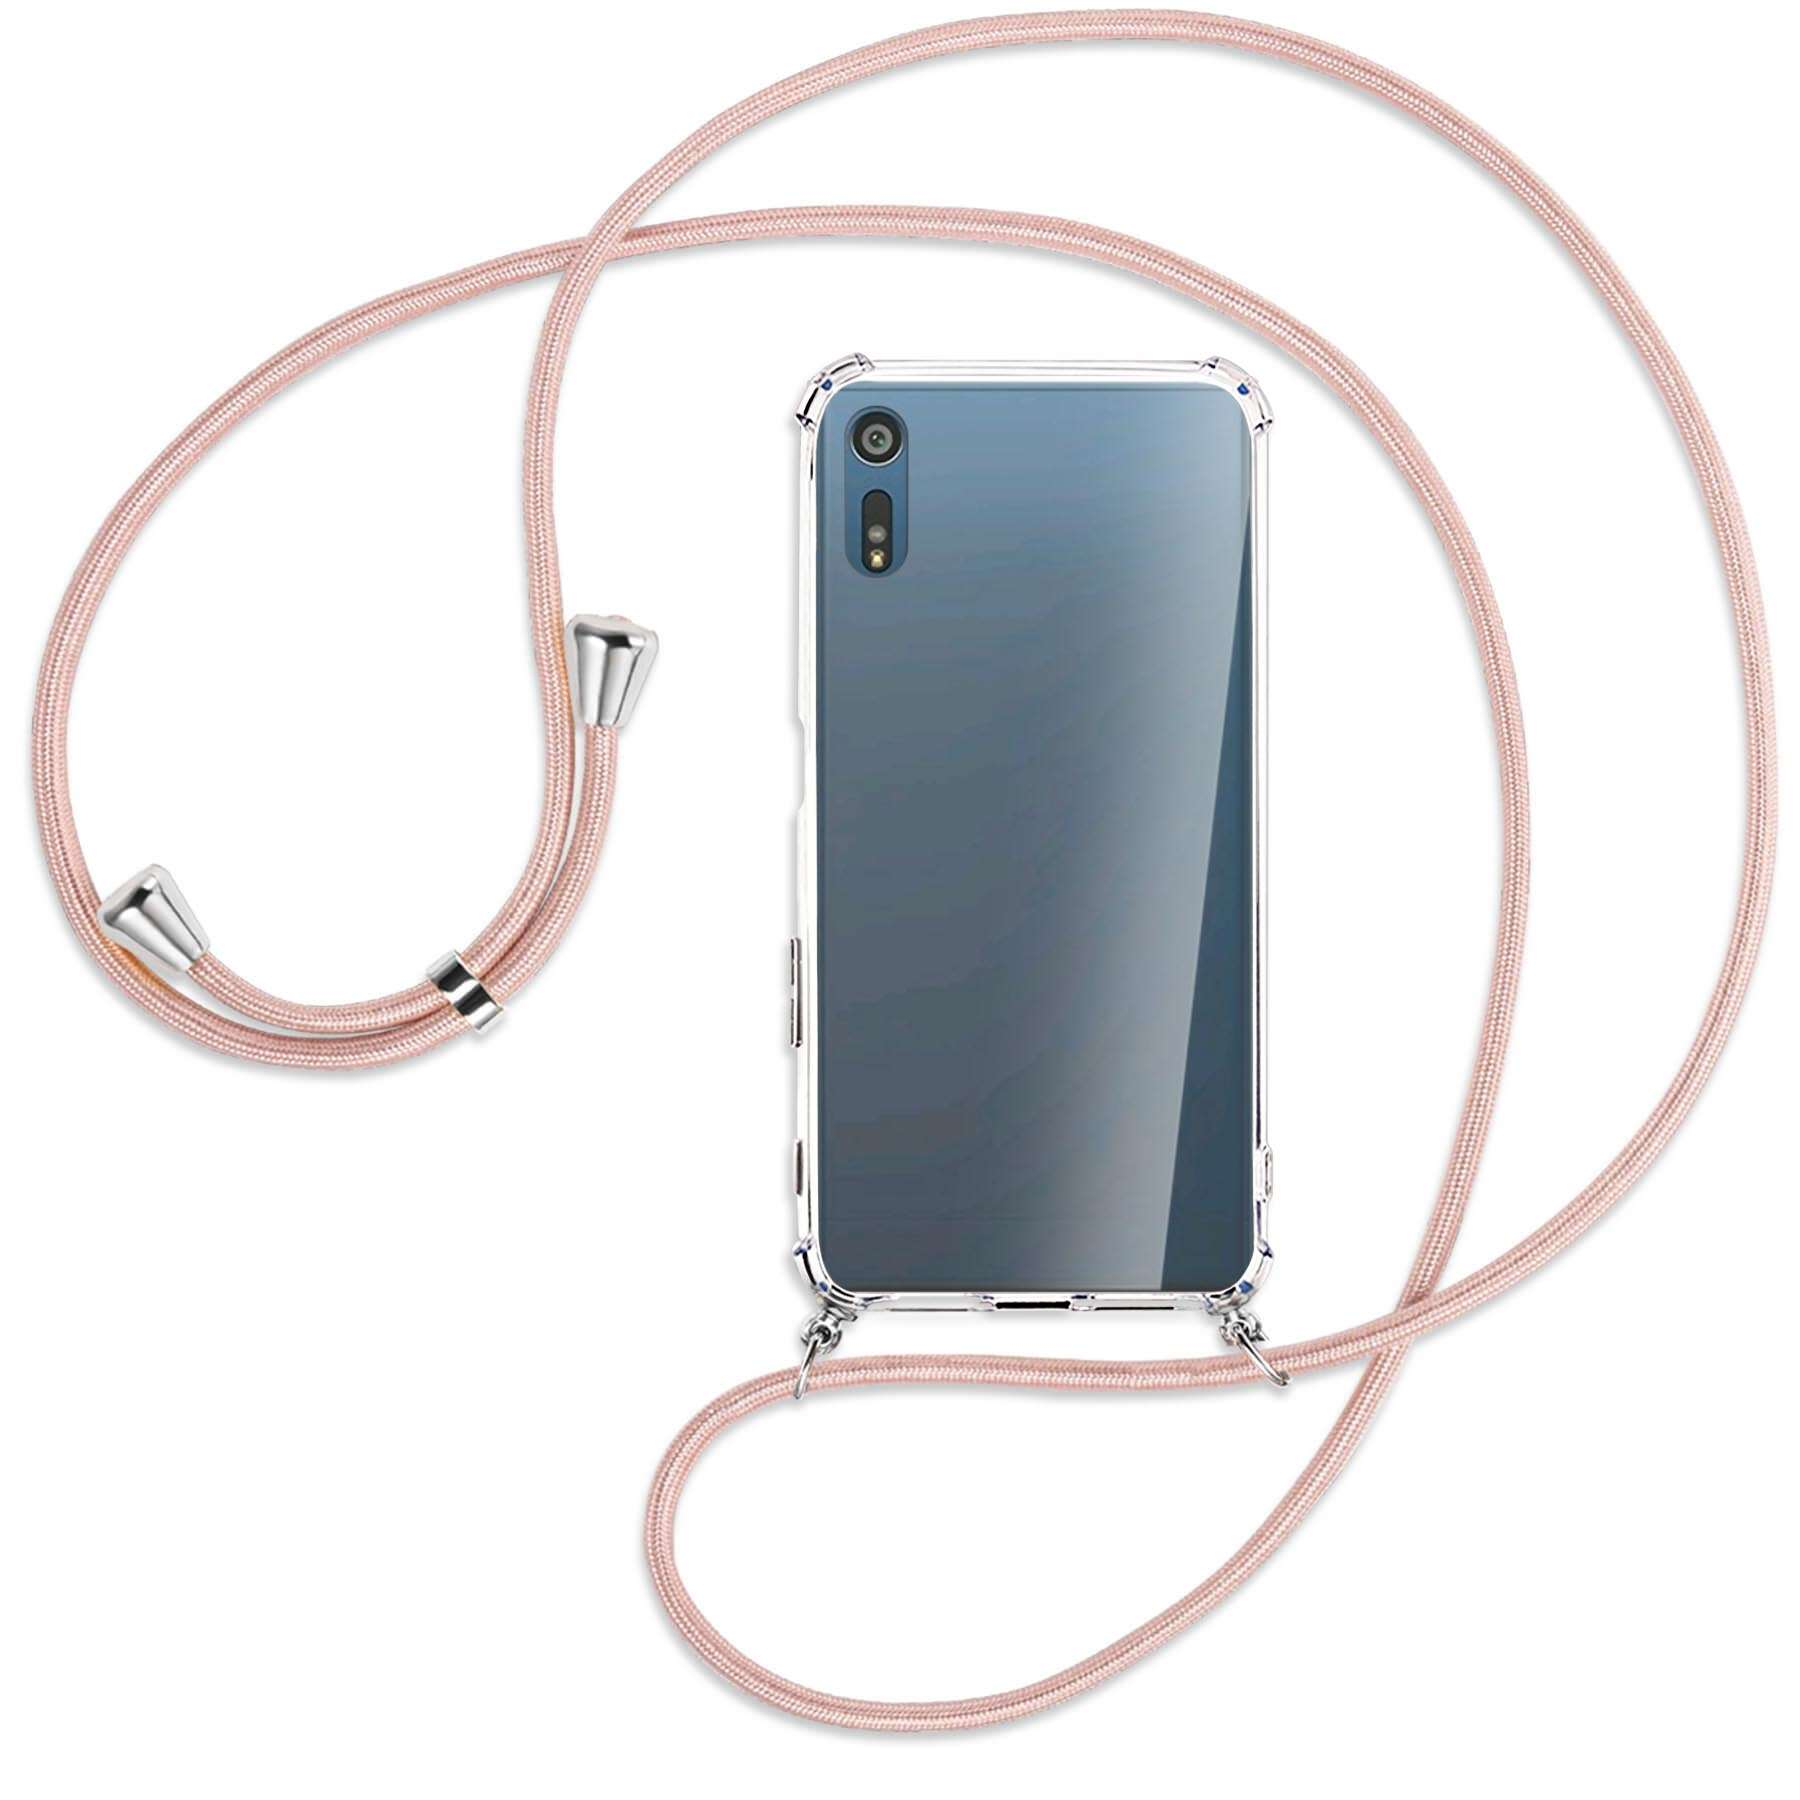 Xperia XZ, Backcover, ENERGY XZs, Rosegold Umhänge-Hülle MORE MTB Xperia Silber Kordel, / Sony, mit